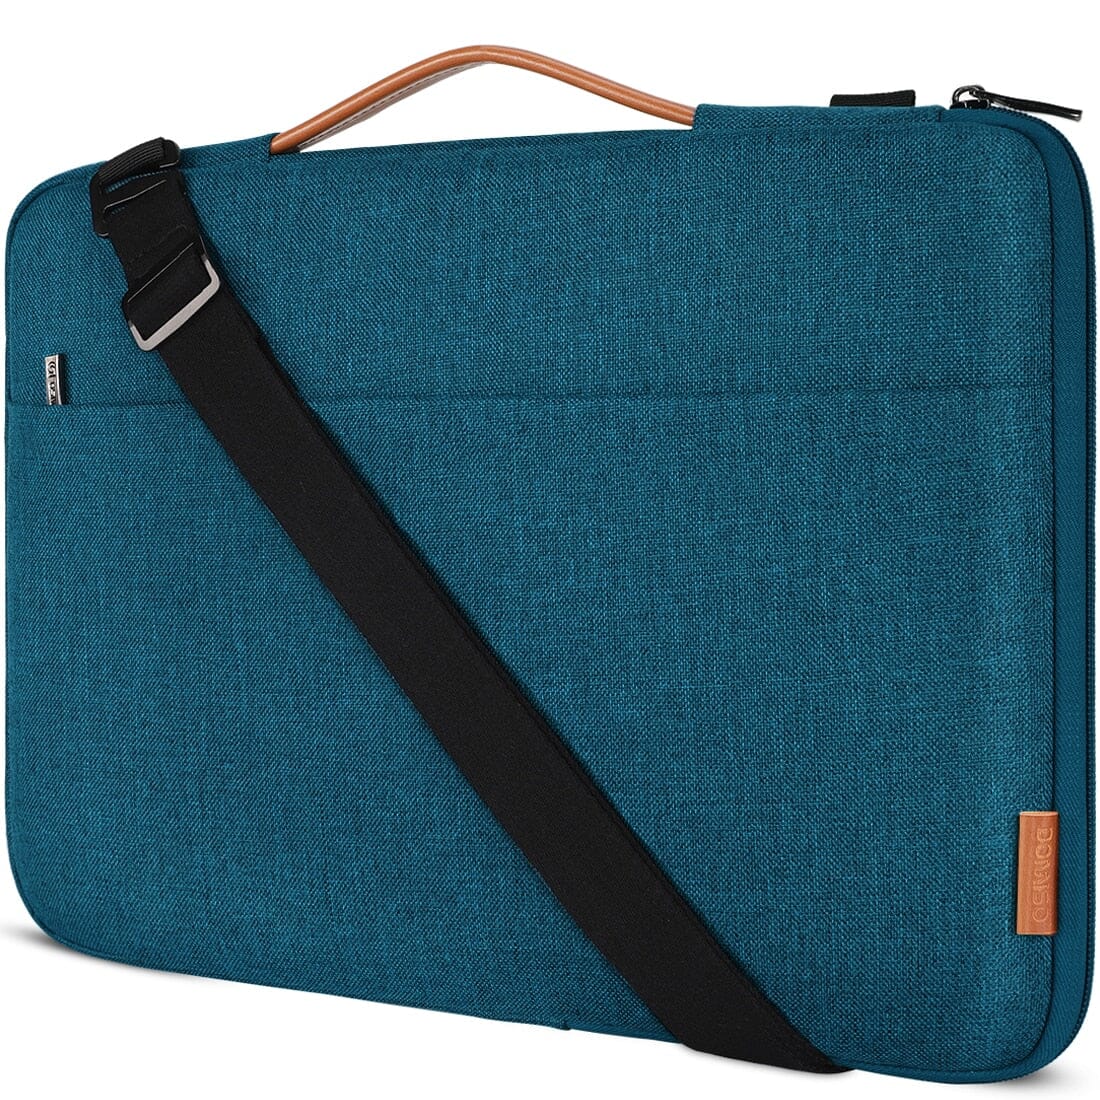 Laptop Messenger Bag 15.6 inch The Store Bags Dark Green 15.6-inch 